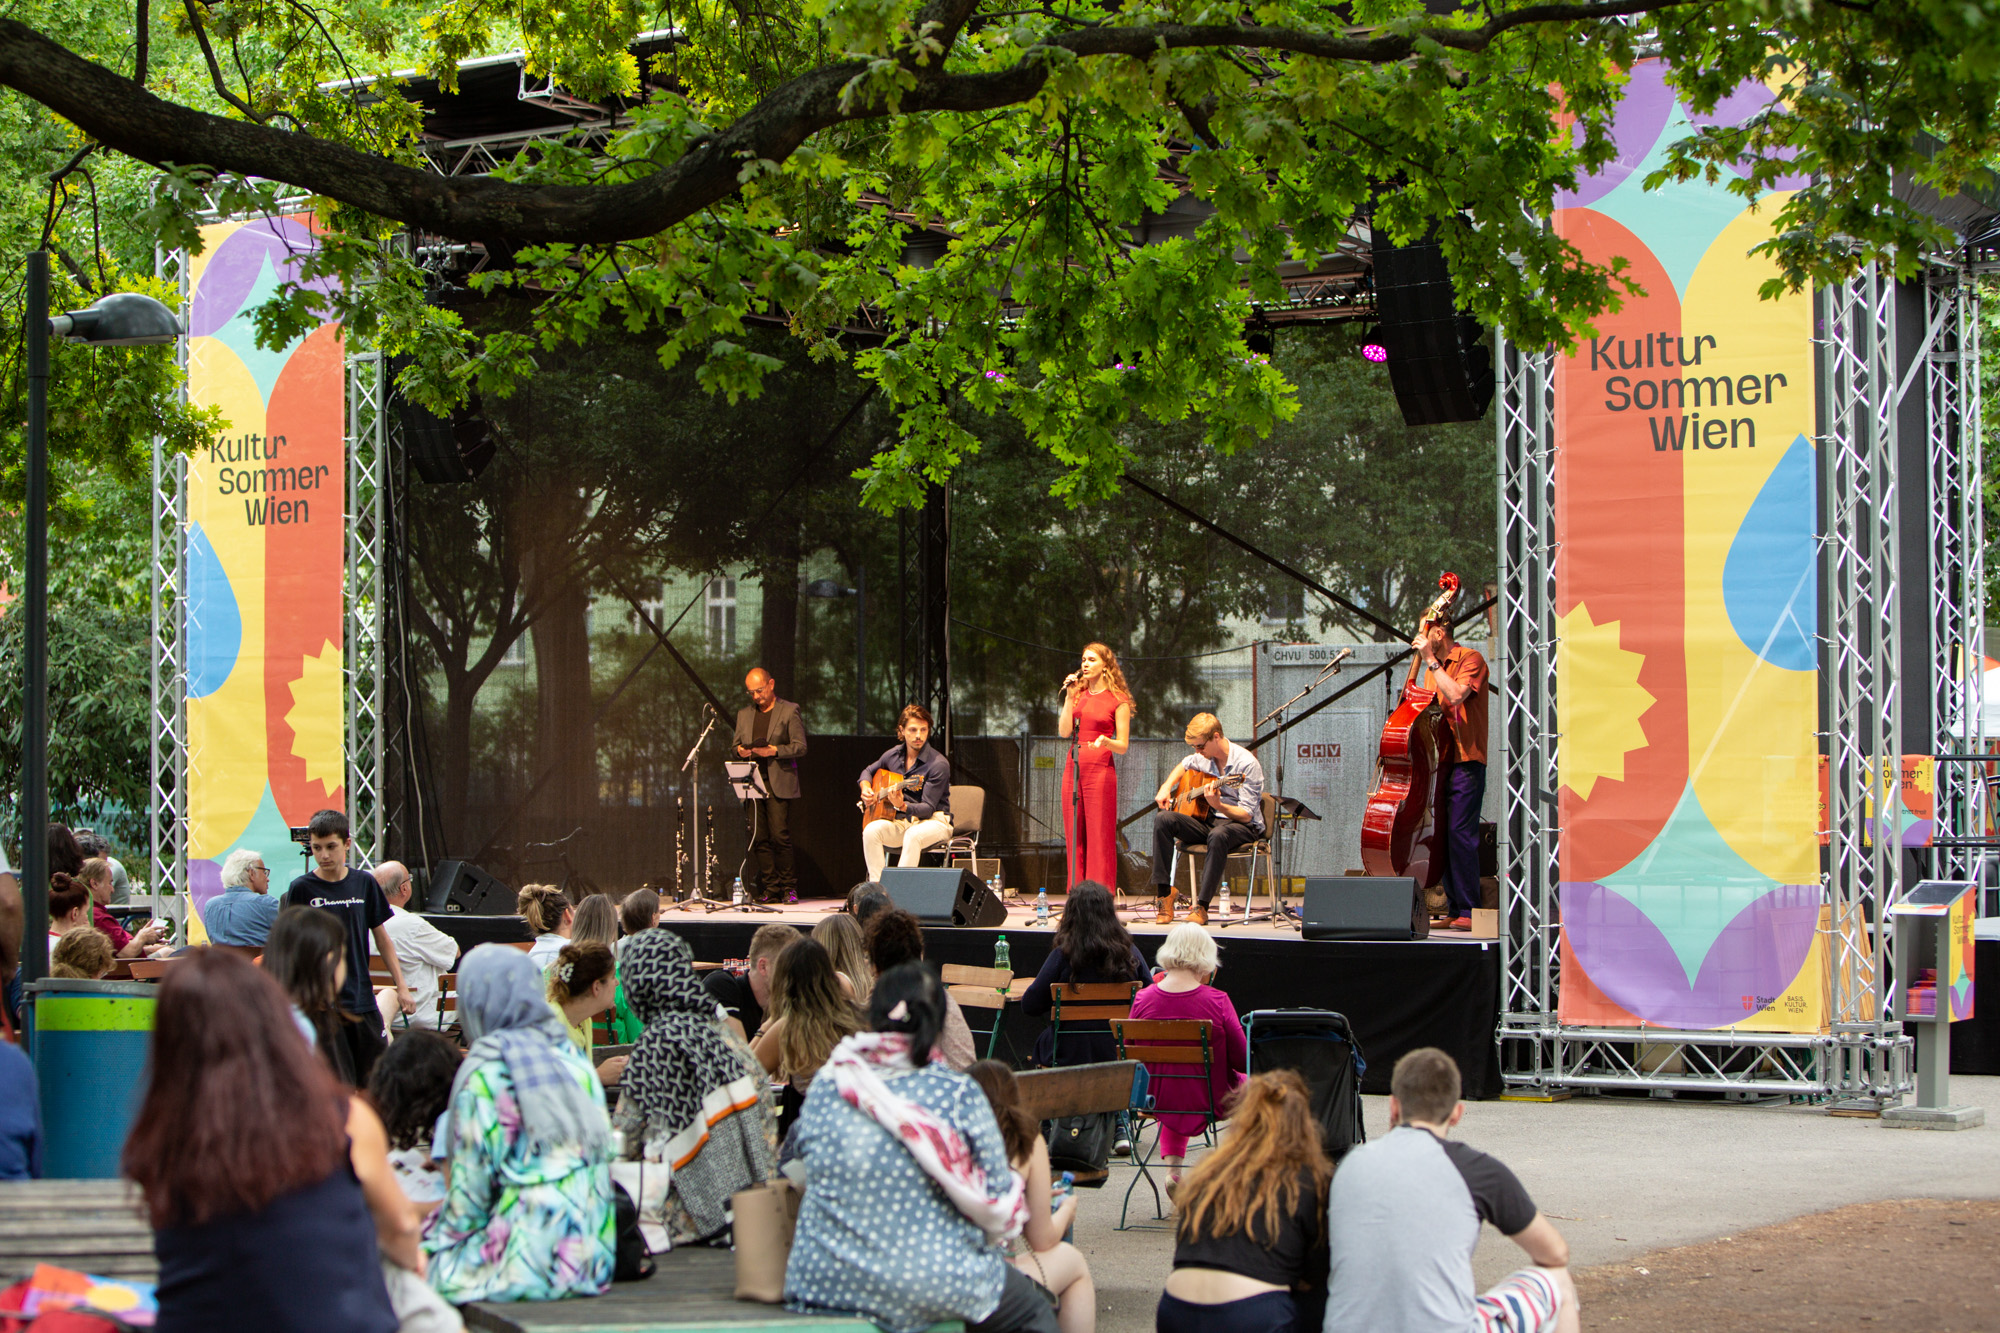 Kultursommer Wien: festival with free admission